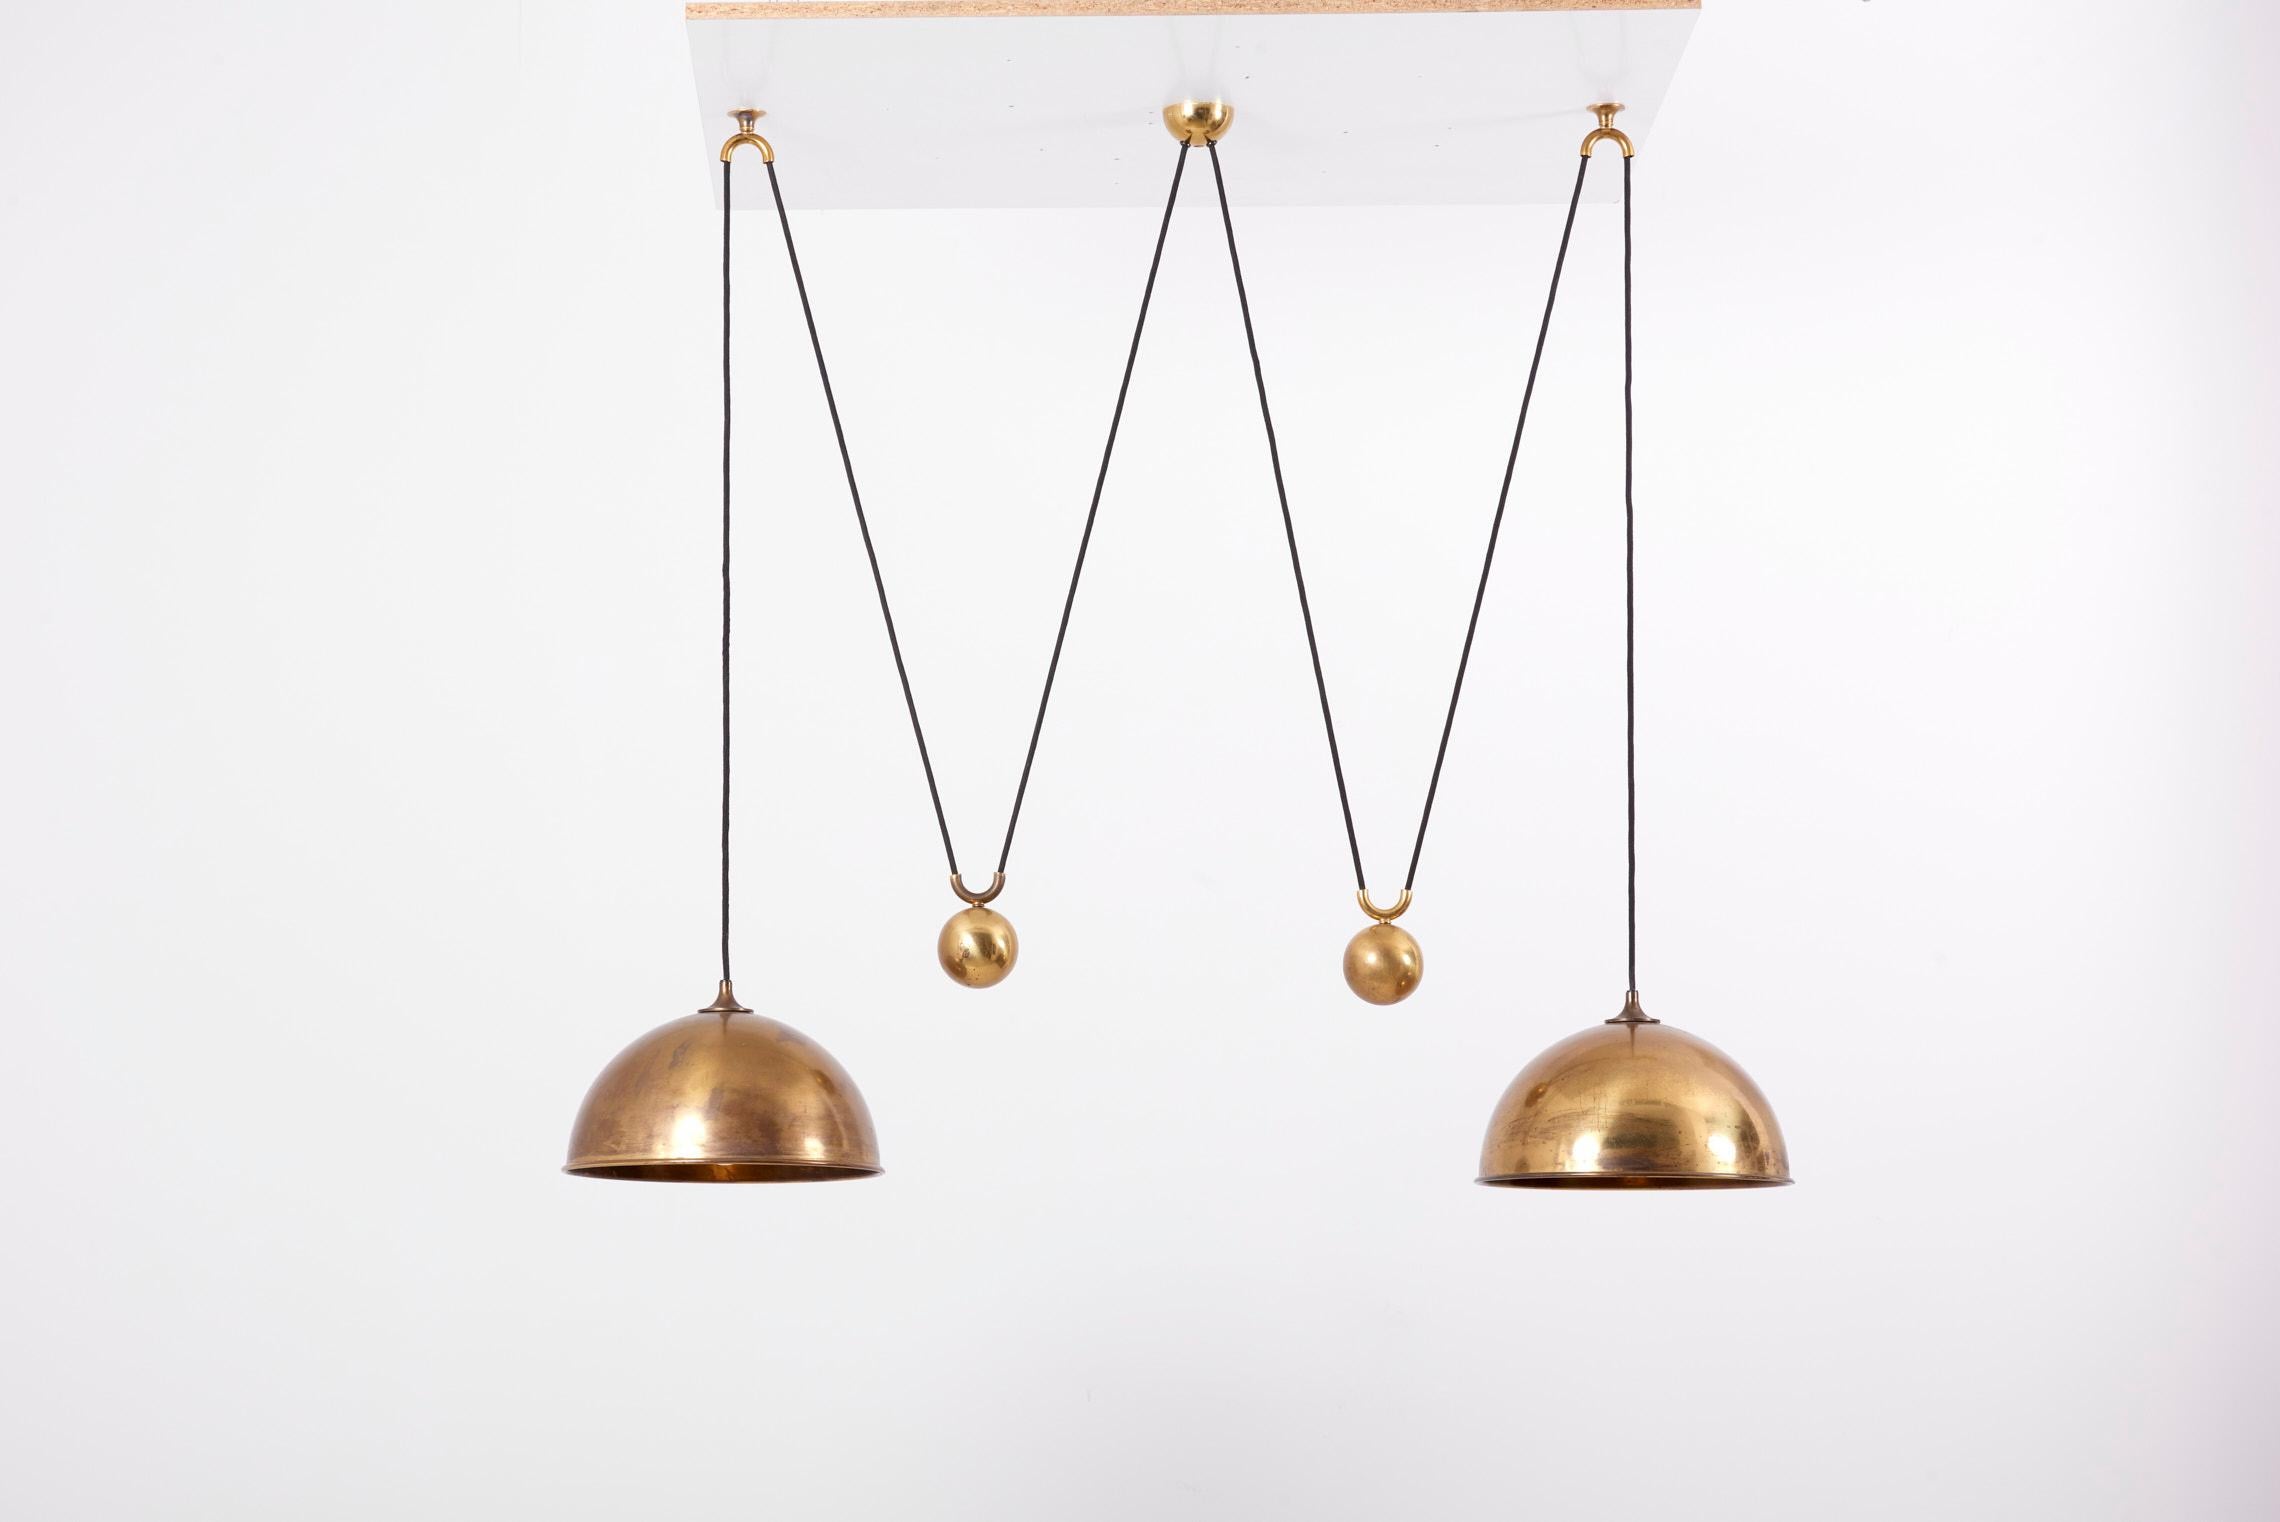 Beautiful Florian Schulz double Posa pendant lamp in brass.

1 x E27 socket / each lamp shade.

Please note: Lamp should be fitted professionally in accordance to local requirements.